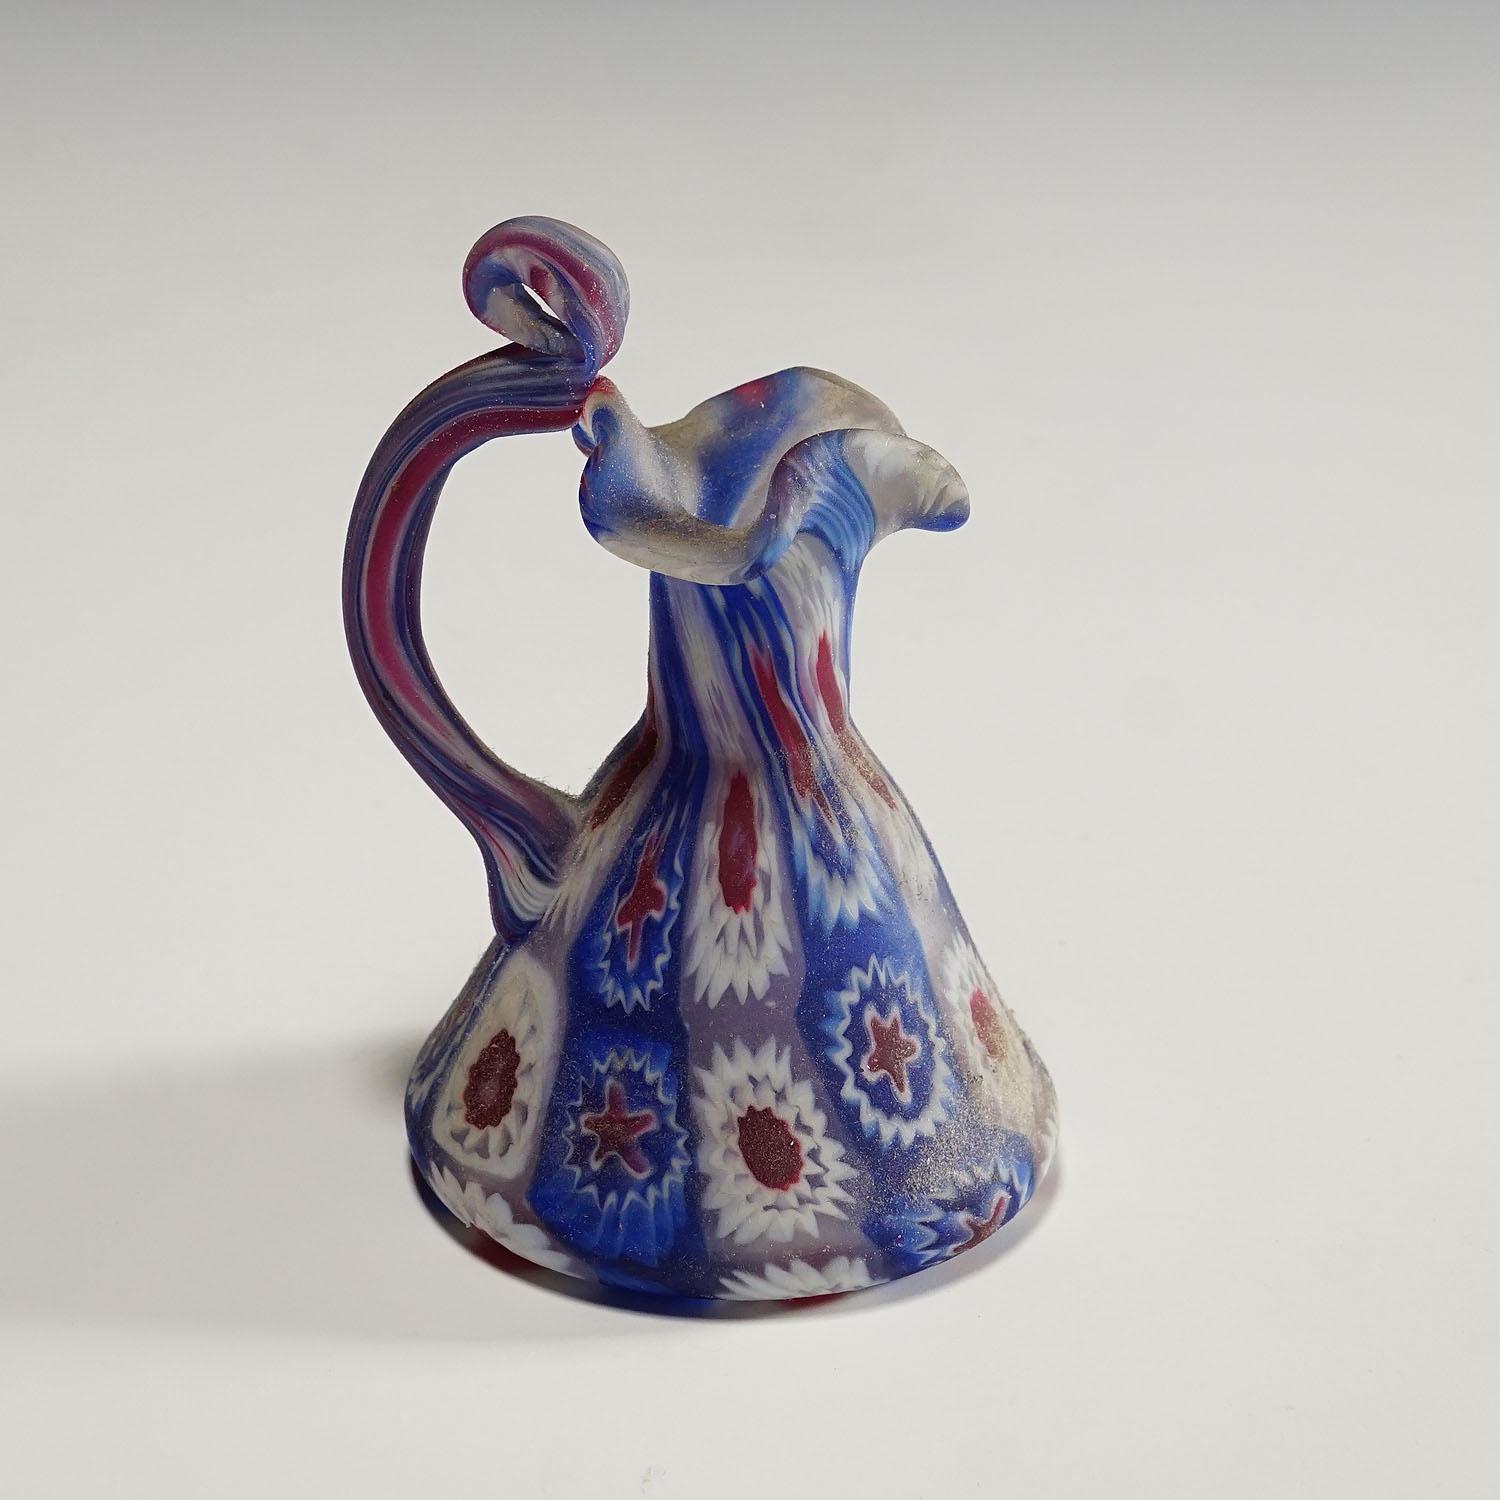 20th Century Fratelli Toso Millefiori Pitcher in Blue, Red and White, Murano, 1910 For Sale